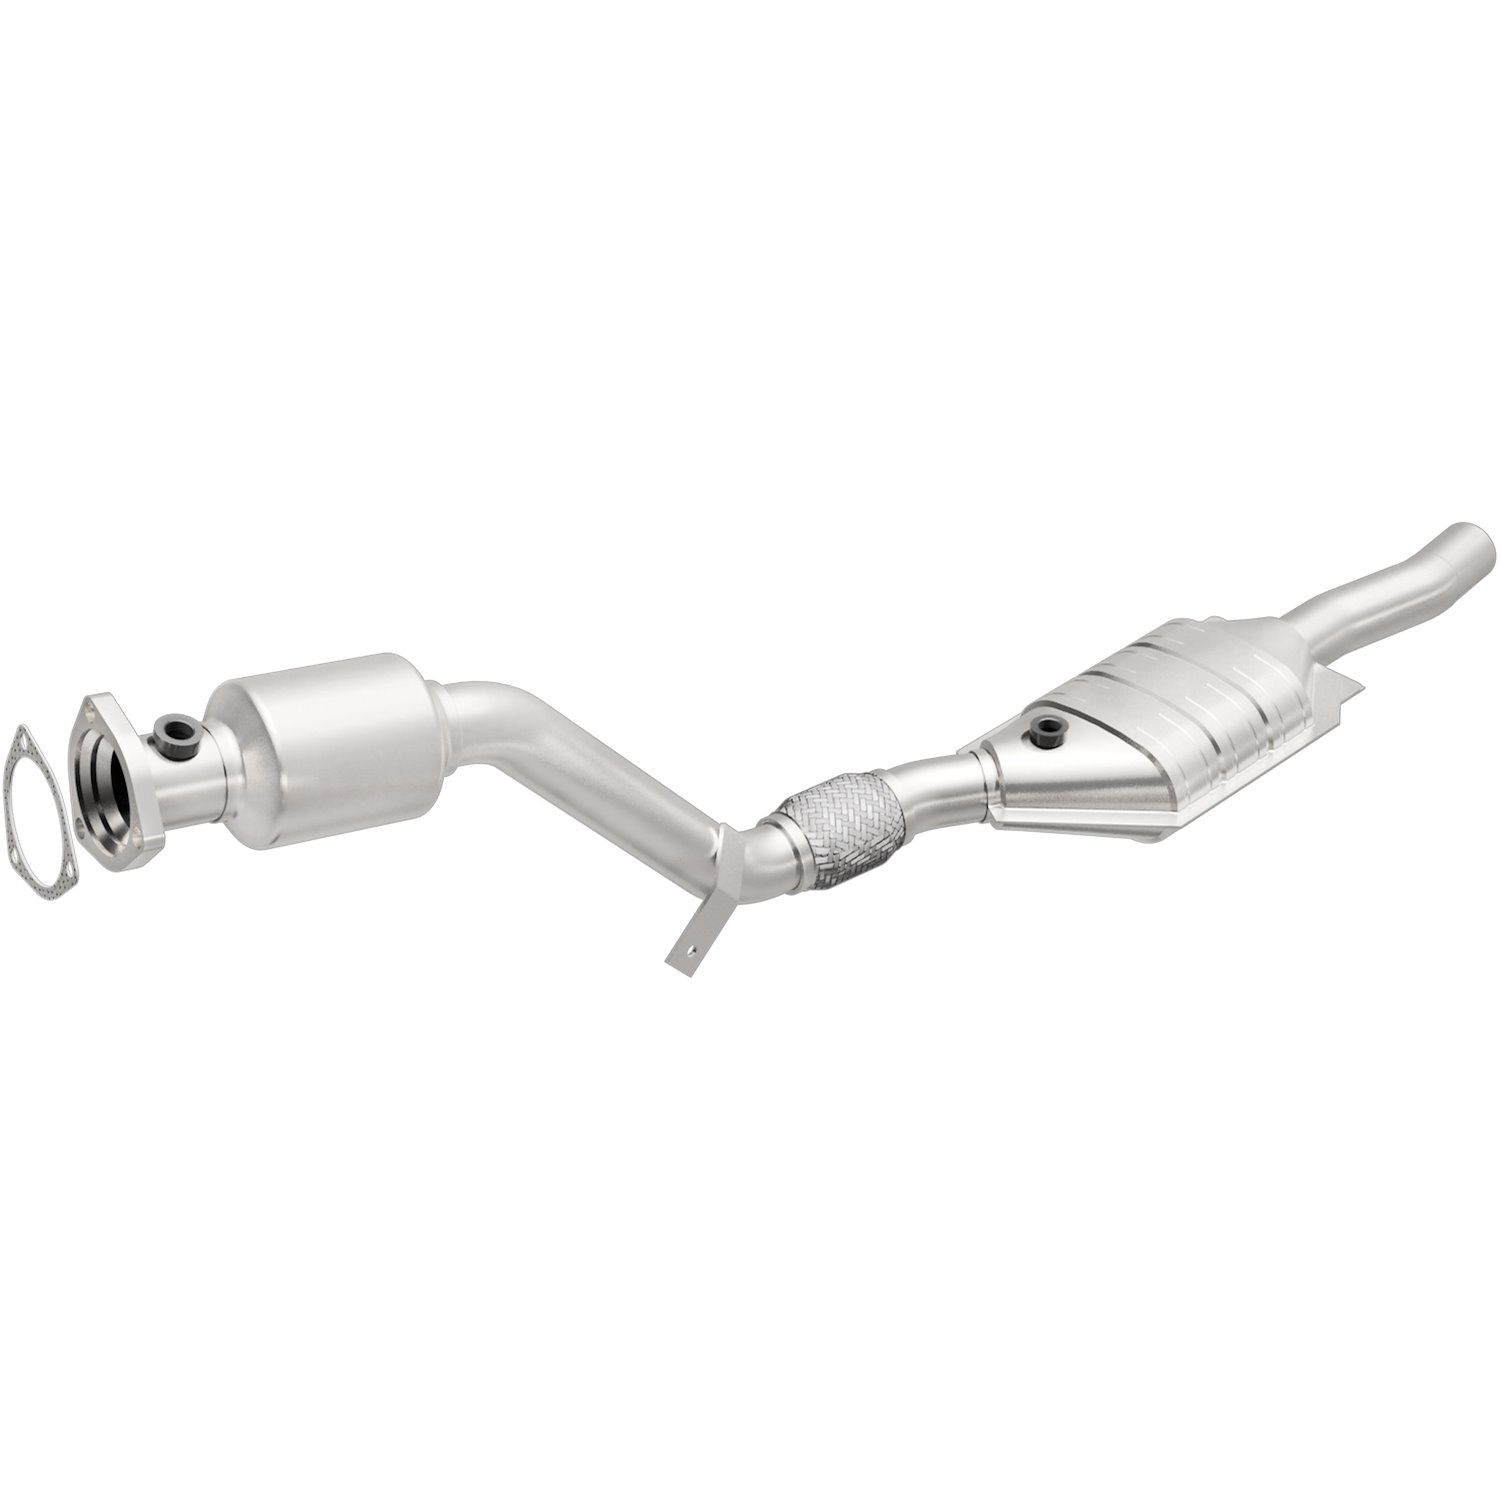 California Grade CARB Compliant Direct-Fit Catalytic Converter 444327